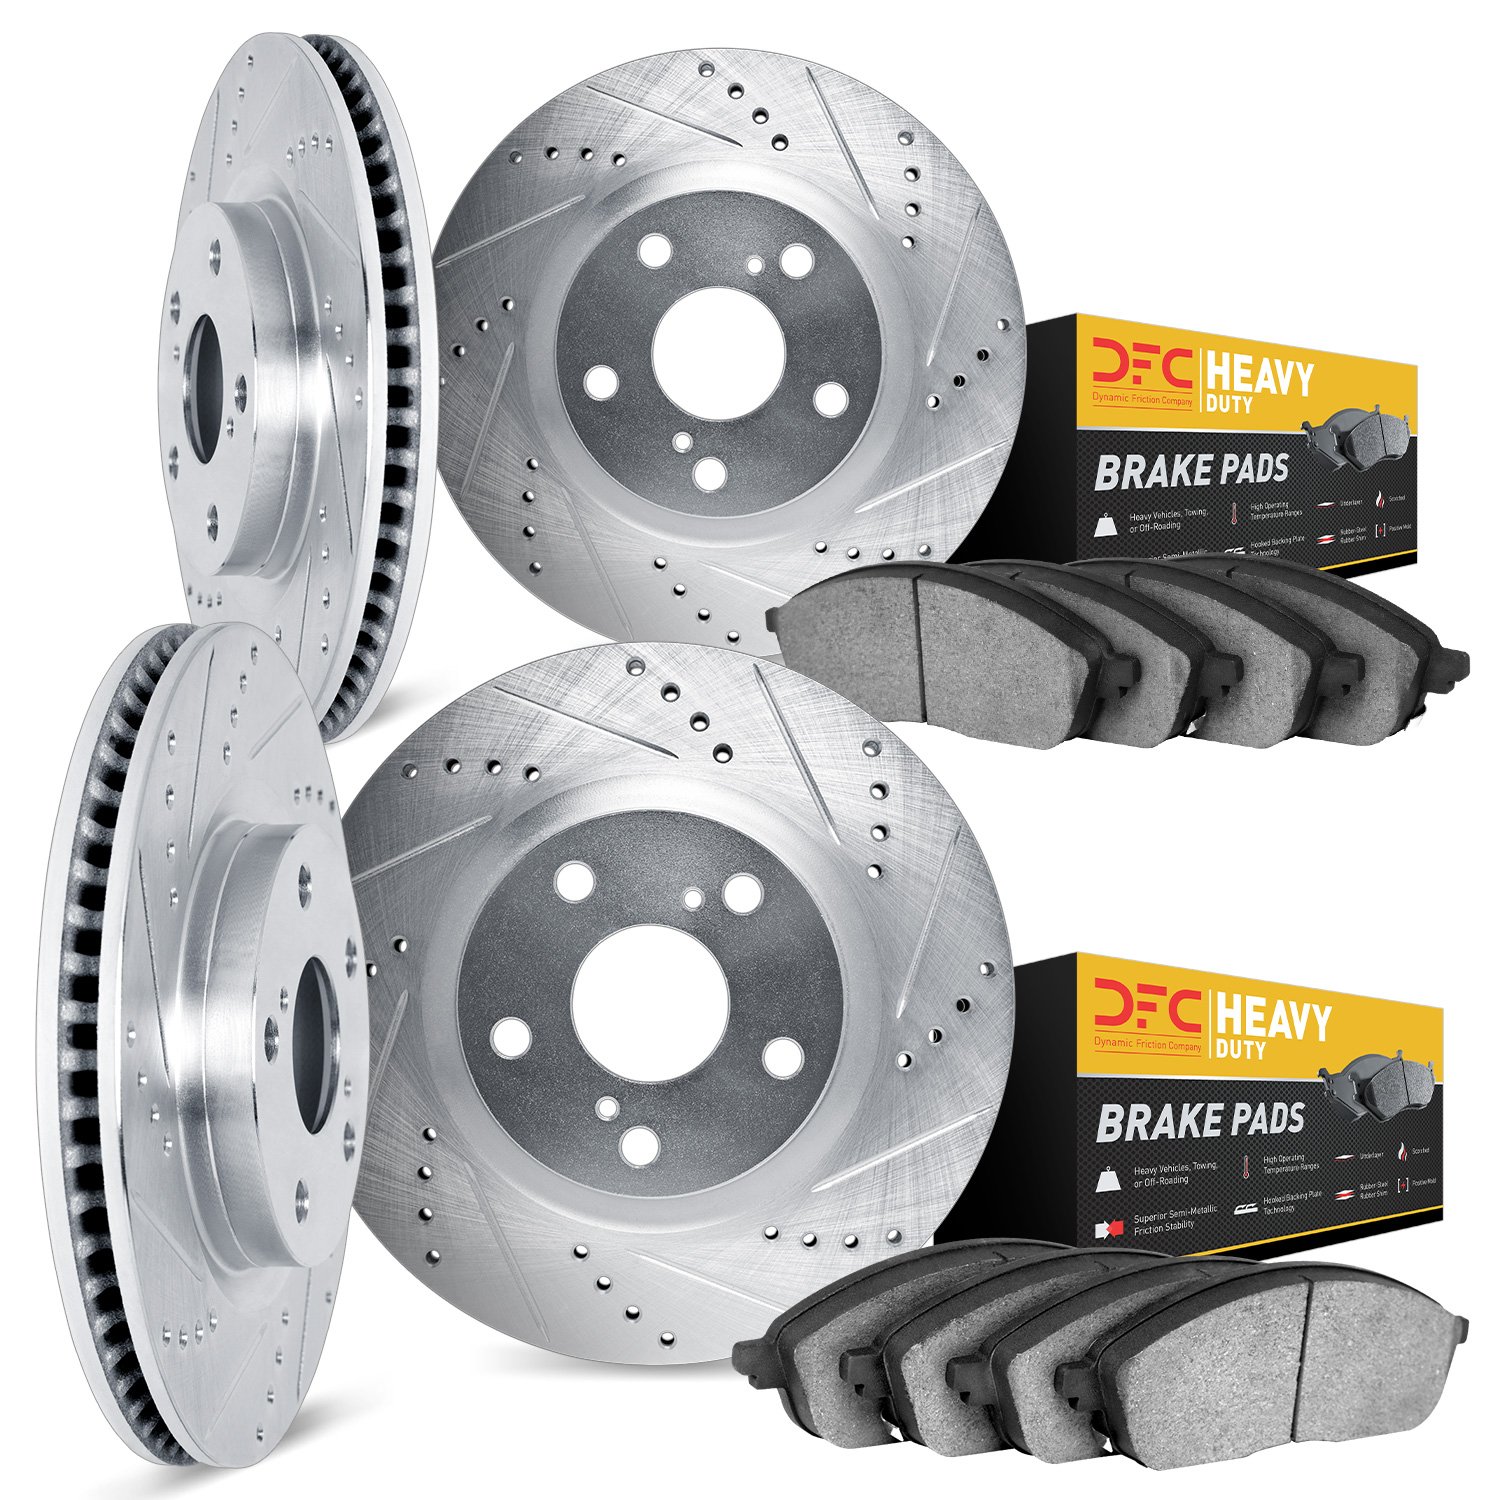 7204-40227 Drilled/Slotted Rotors w/Heavy-Duty Brake Pads Kit [Silver], 2004-2004 Mopar, Position: Front and Rear